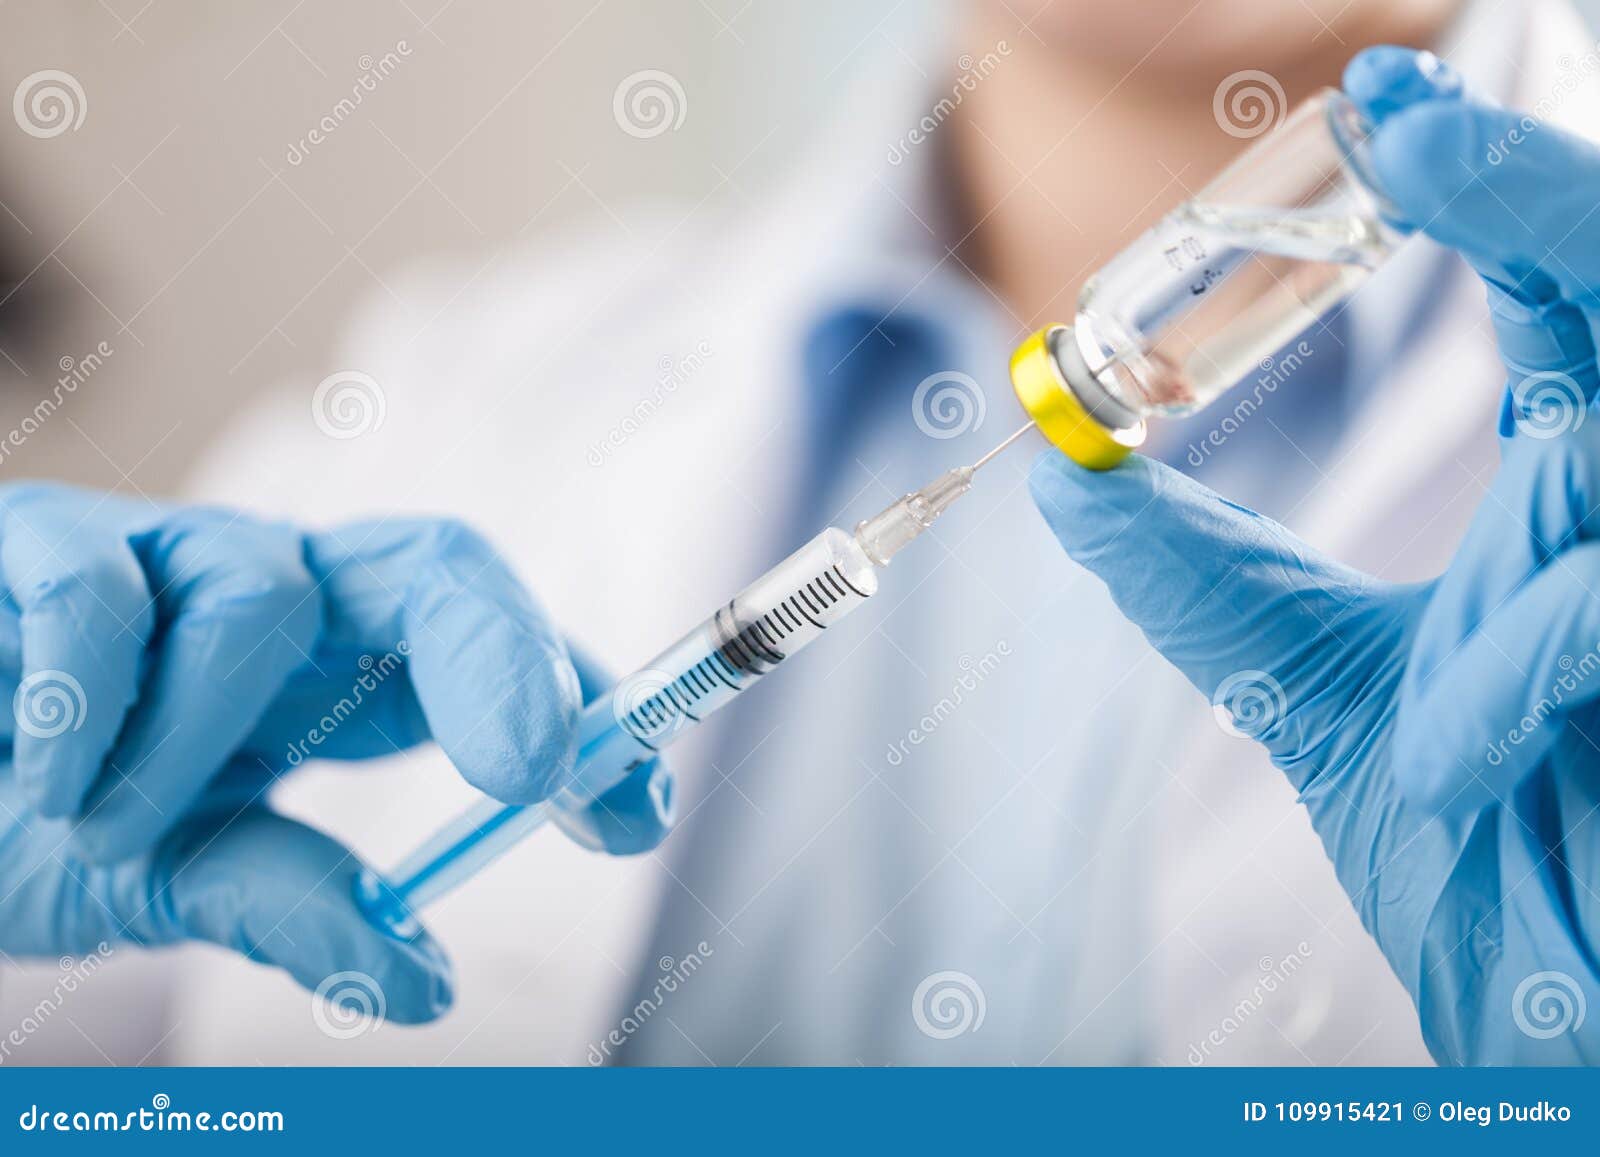 hand holding syringe and vaccine